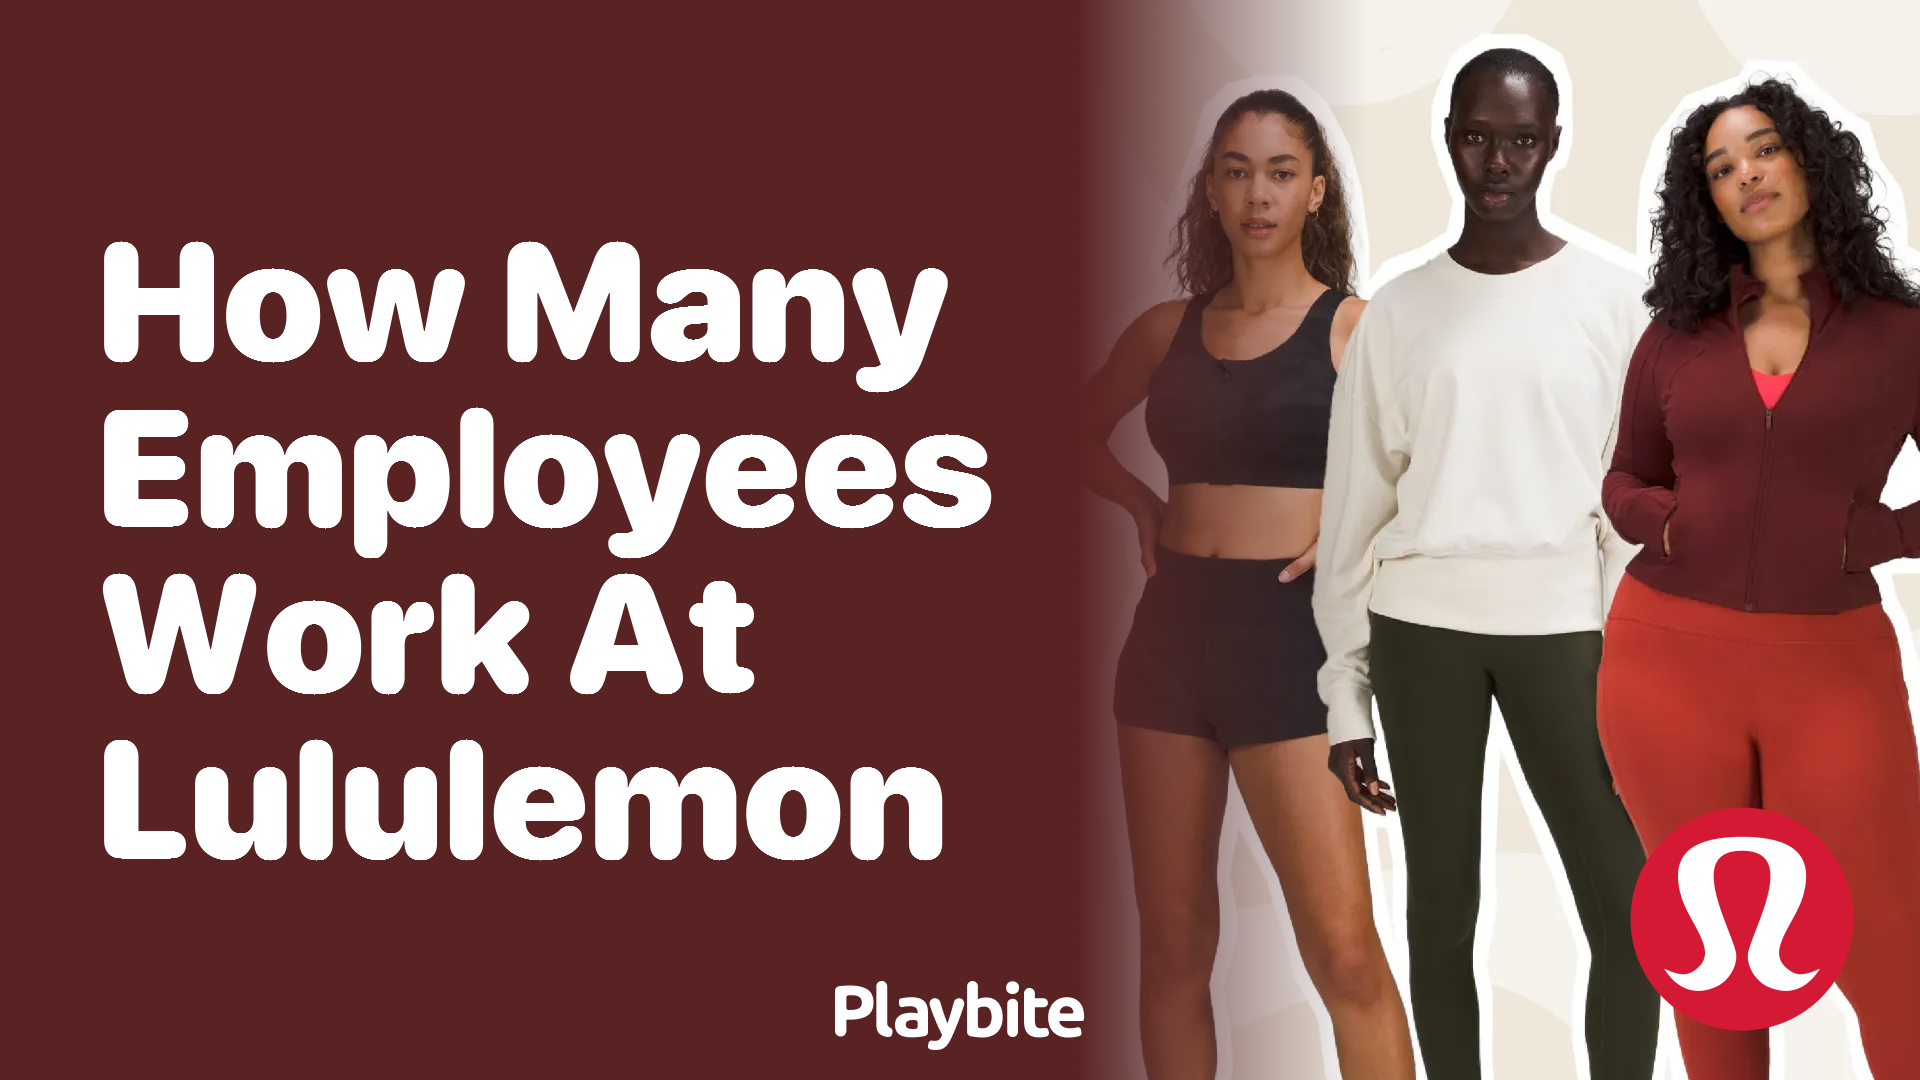 How Many Girls on a College Campus Own Lululemon? - Playbite